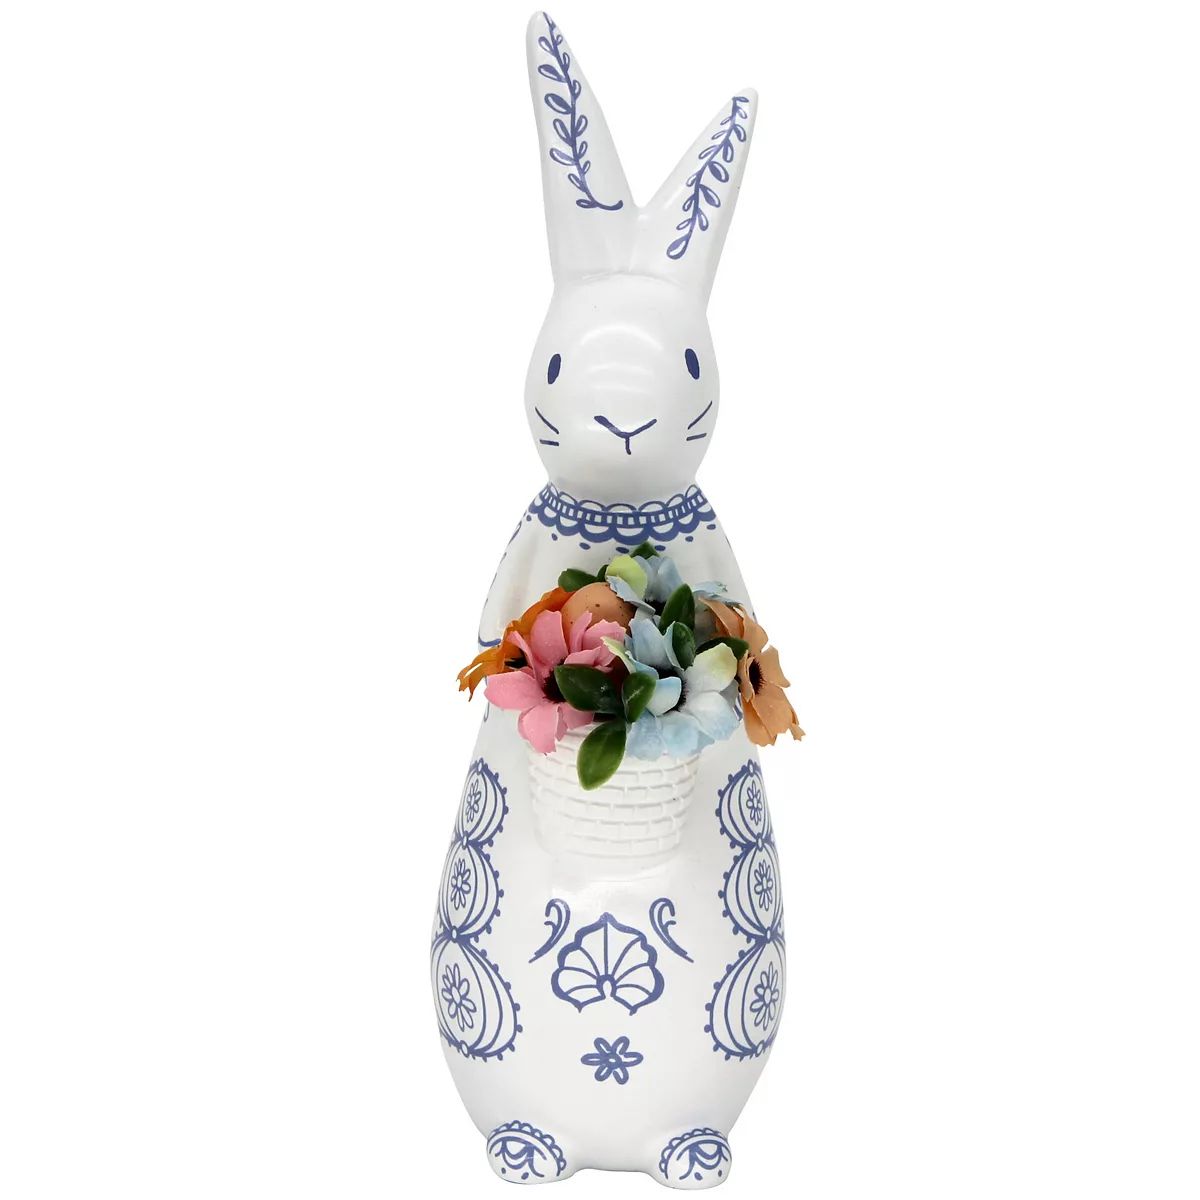 Celebrate Together™ Easter Folk Patterned Bunny With Faux Flowers Table Decor | Kohl's